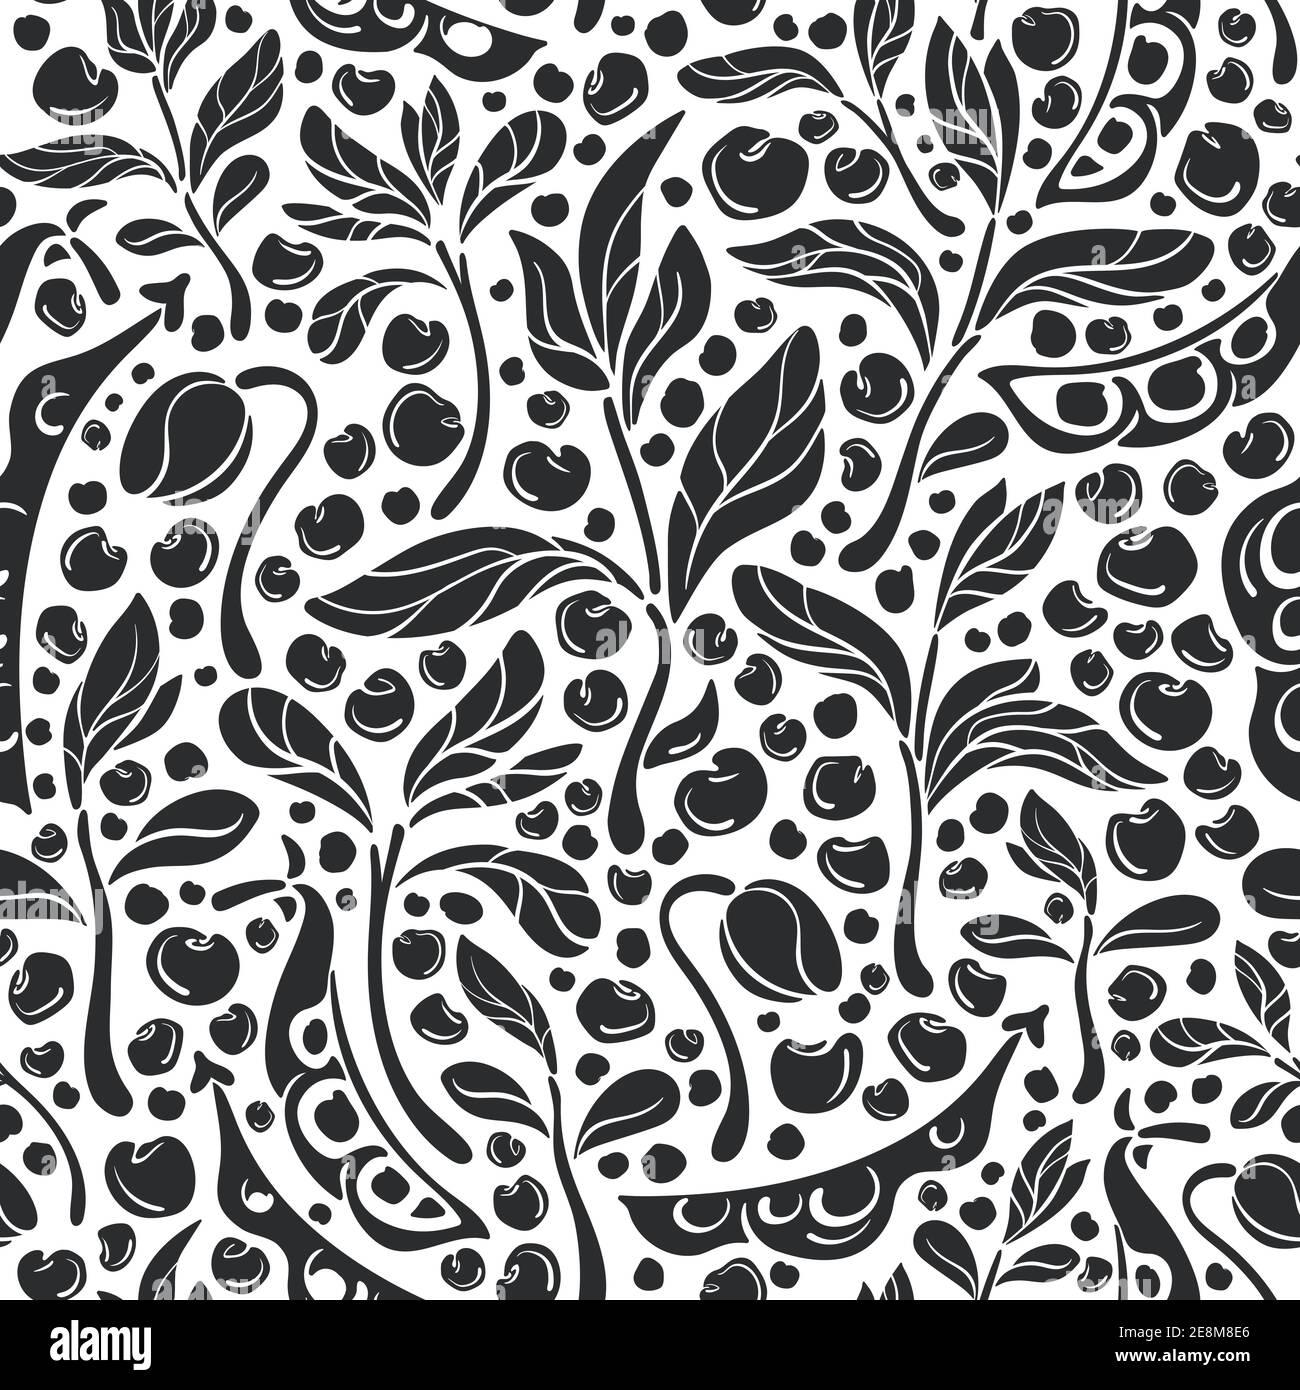 Legumes seamless pattern. Vector pod, bean, sprout, soy, lentils on white background. Natural vegan food. Art graphic illustration. Healthy ingredient Stock Vector